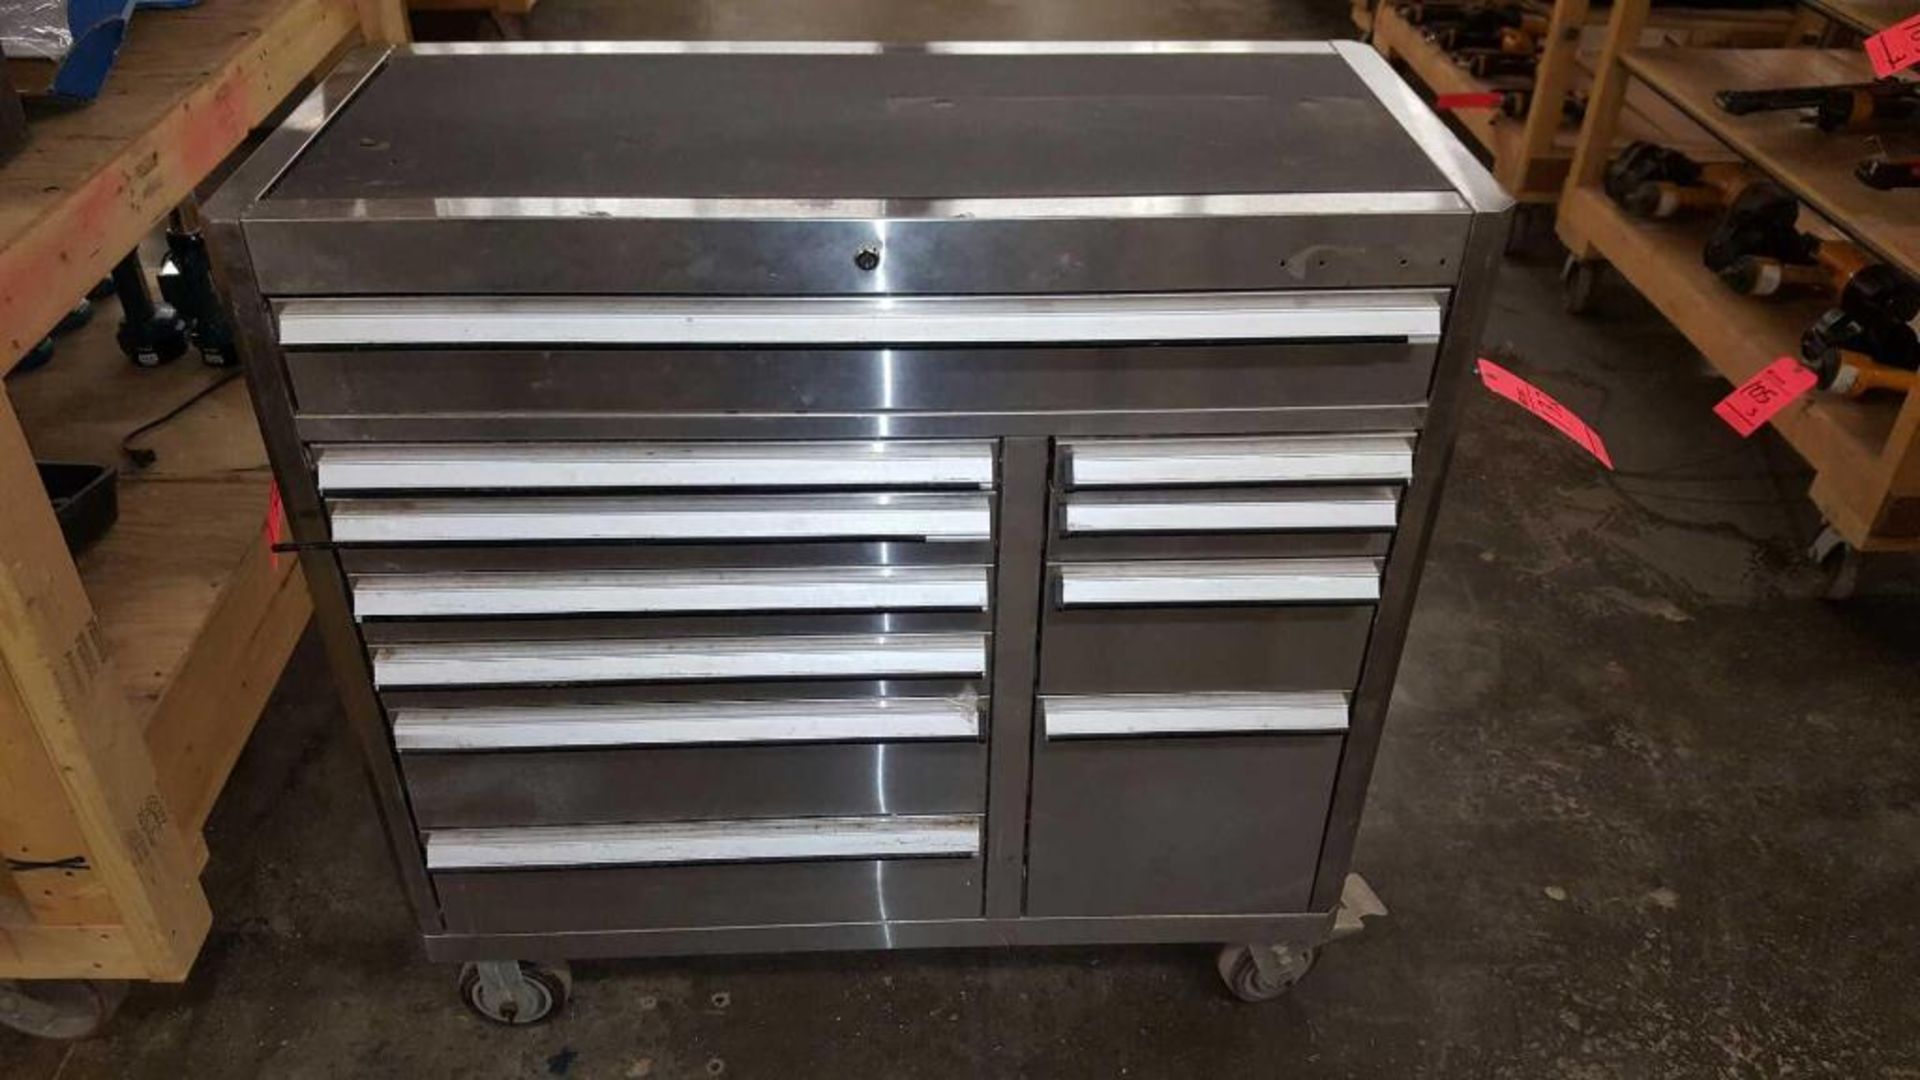 Portable S.S.tool box, 11 drawers, with contents of tools